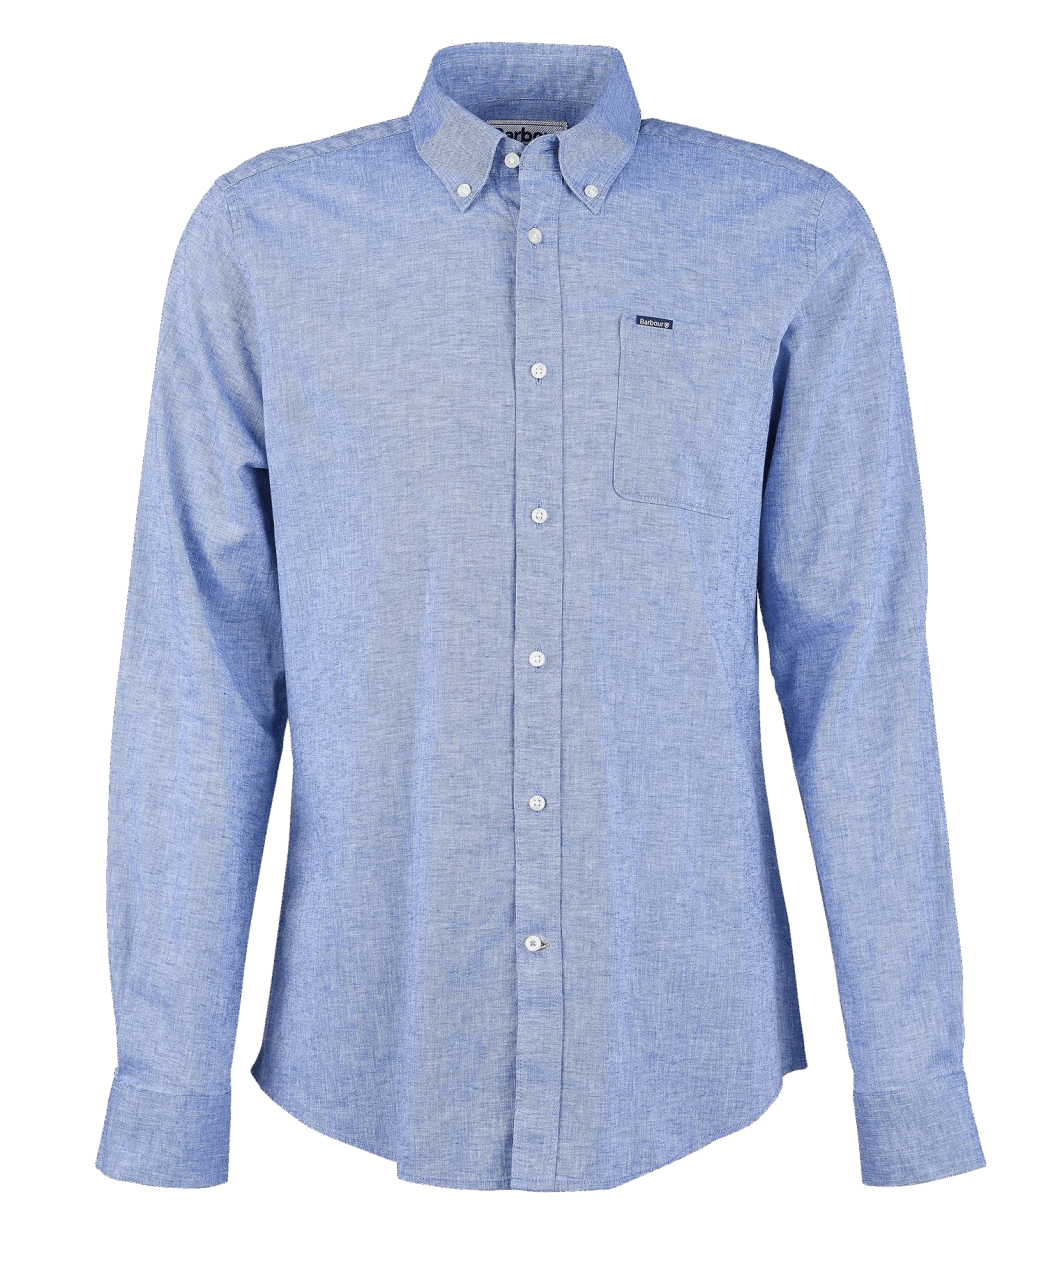 Barbour Nelson Tailored Shirt - blue